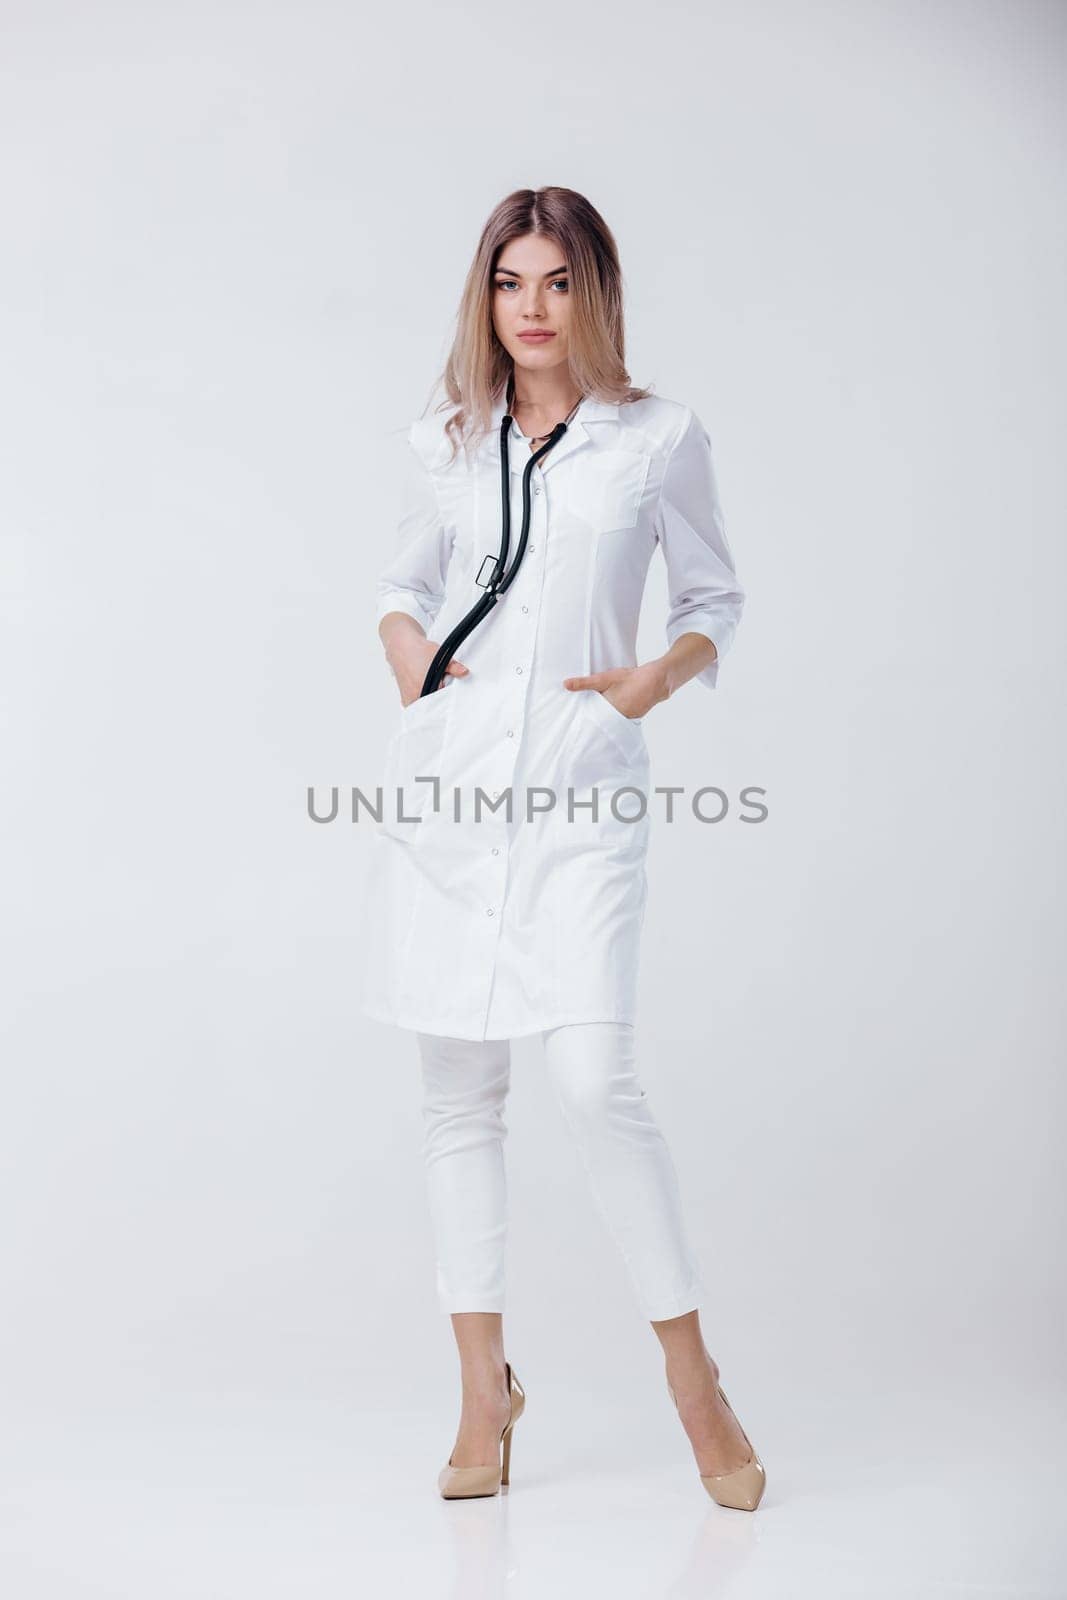 Full length portrait of medical physician doctor woman in white coat with stethoscope on light background.